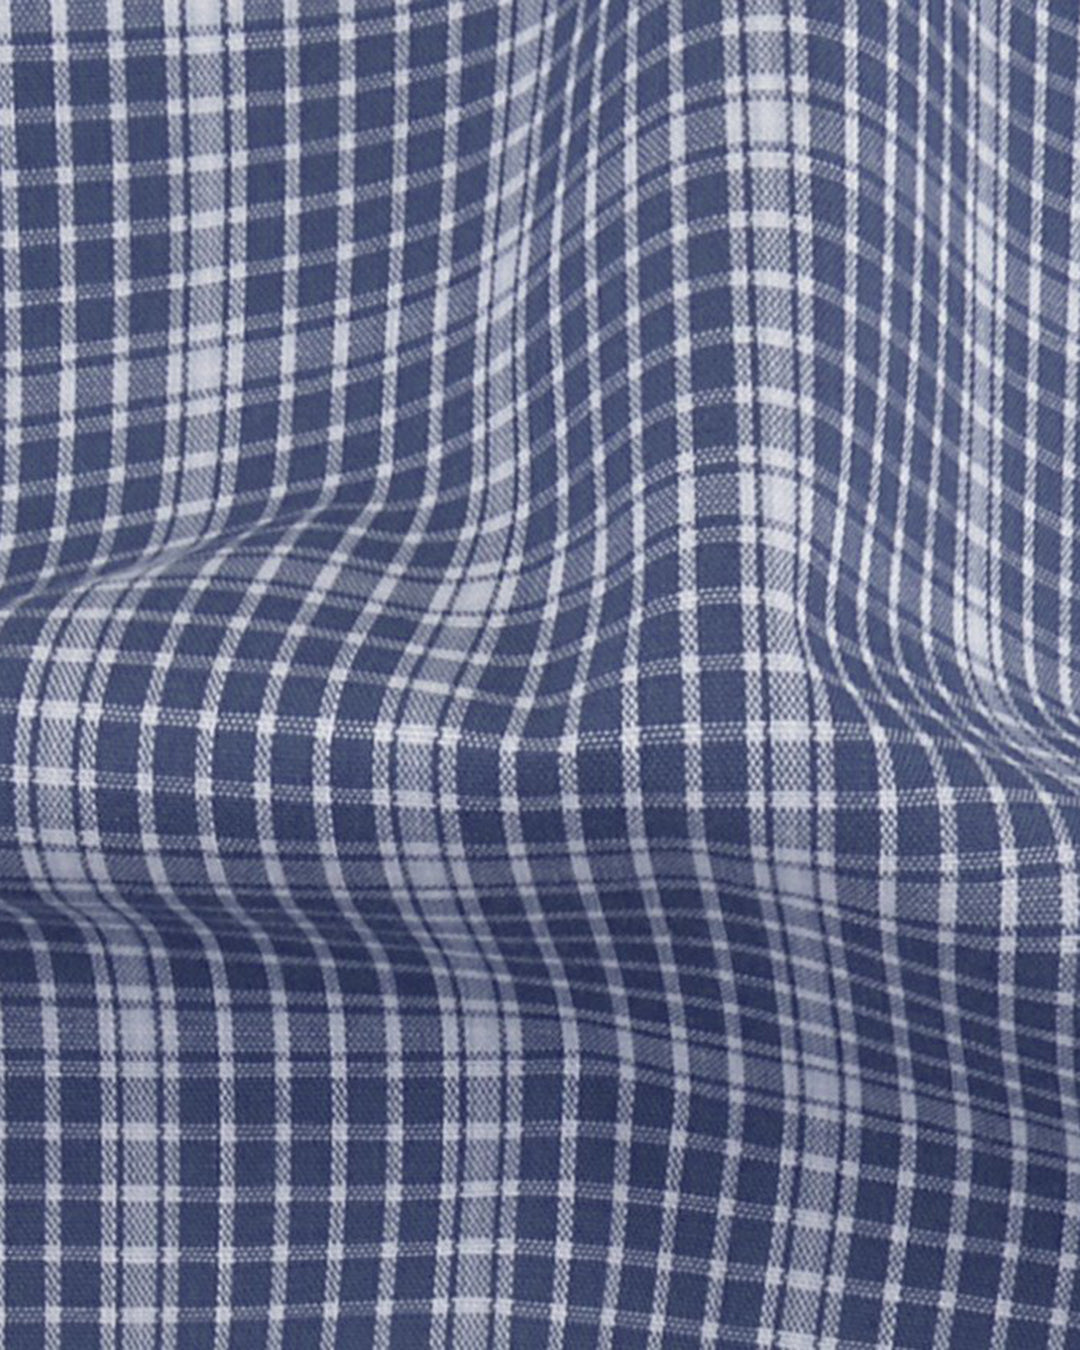 Closeup view of custom check shirts for men by Luxire dark blue and white graph